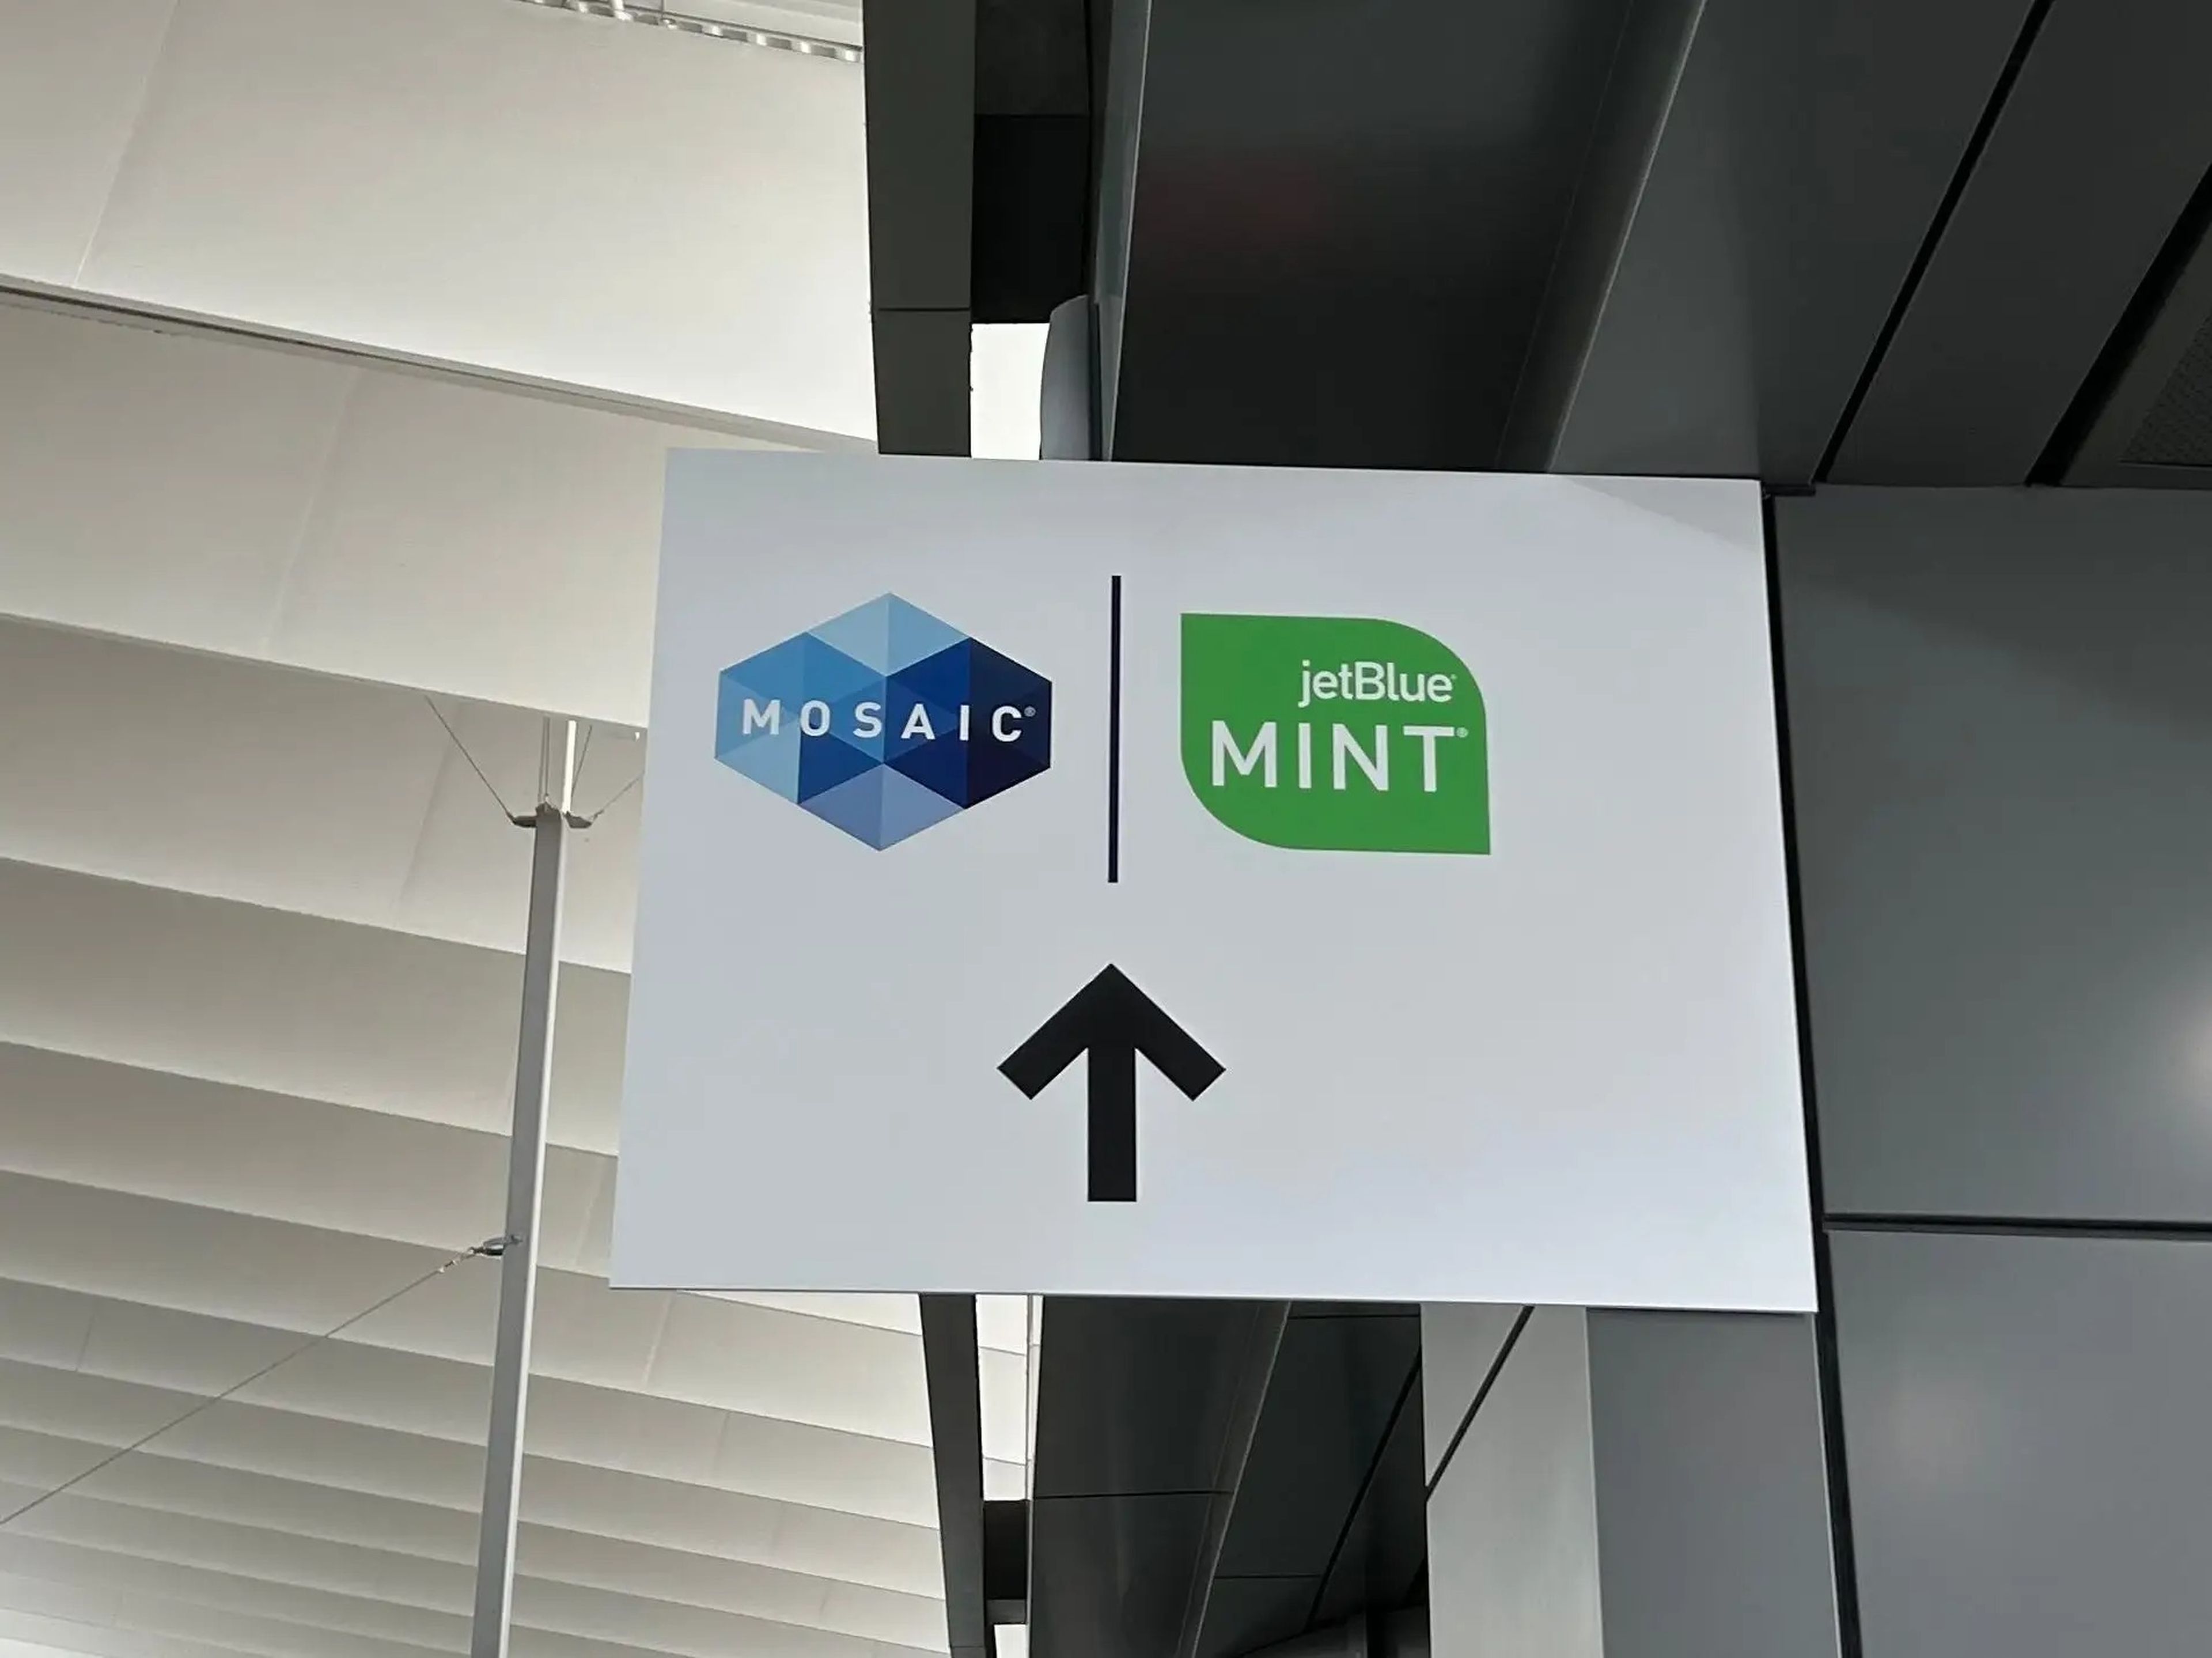 A sign pointing to priority security for JetBlue Mint passengers.